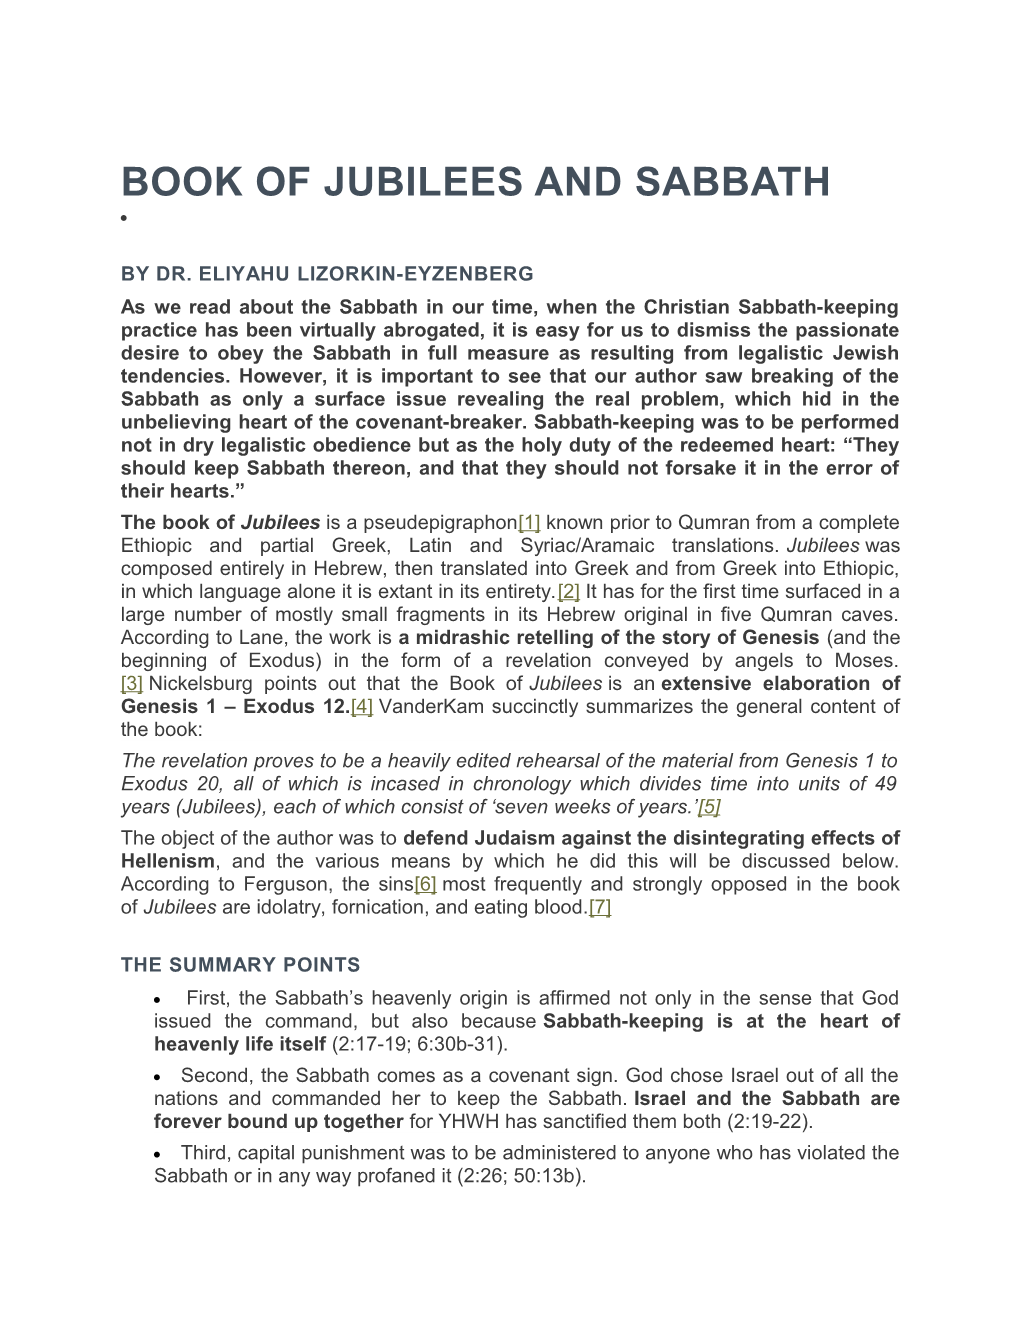 Book of Jubilees and Sabbath